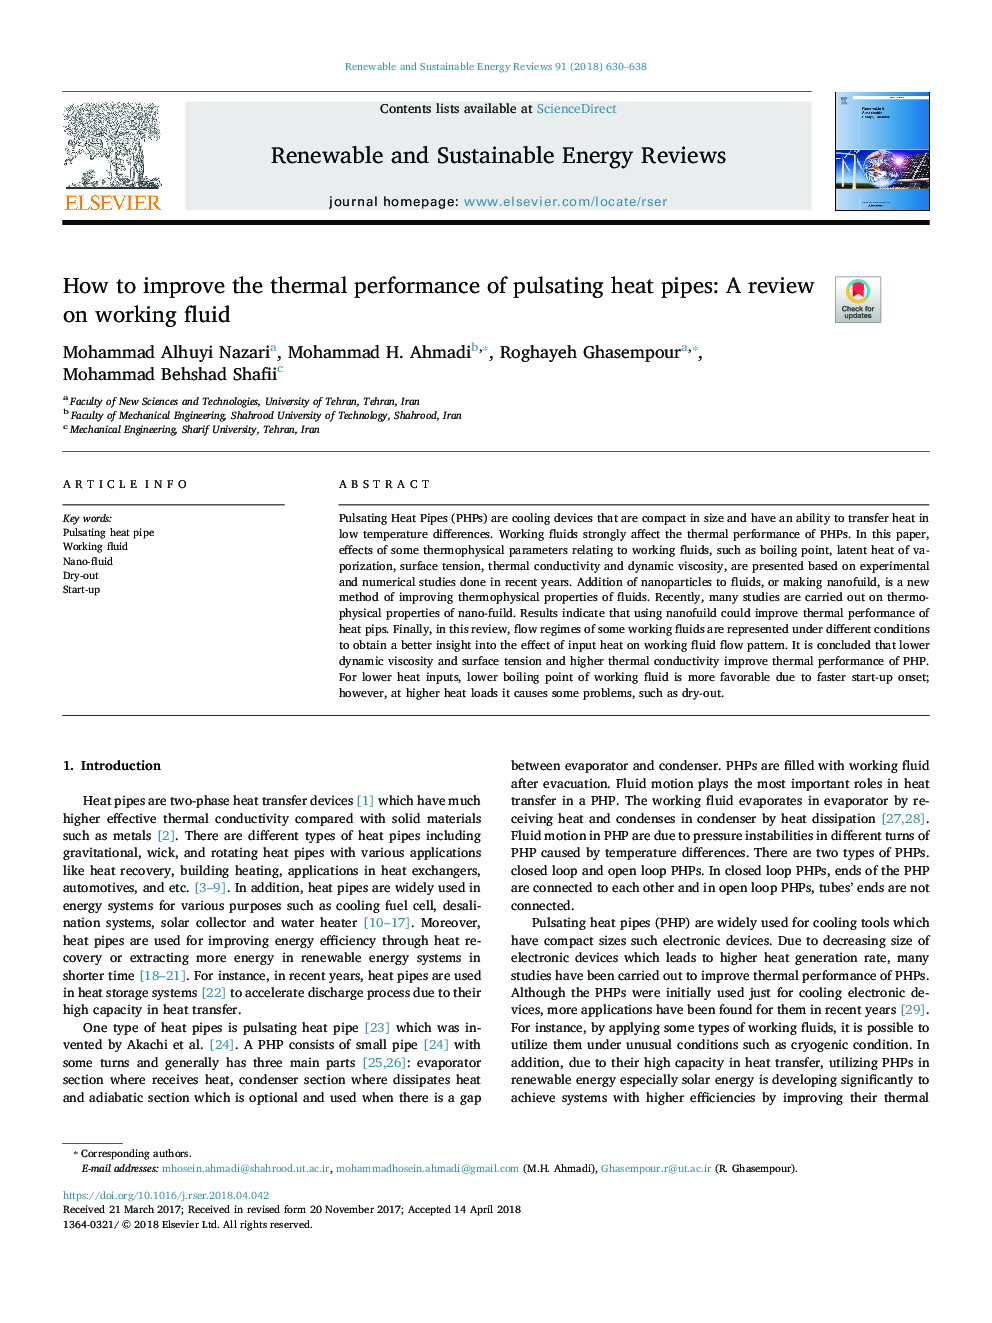 How to improve the thermal performance of pulsating heat pipes: A review on working fluid